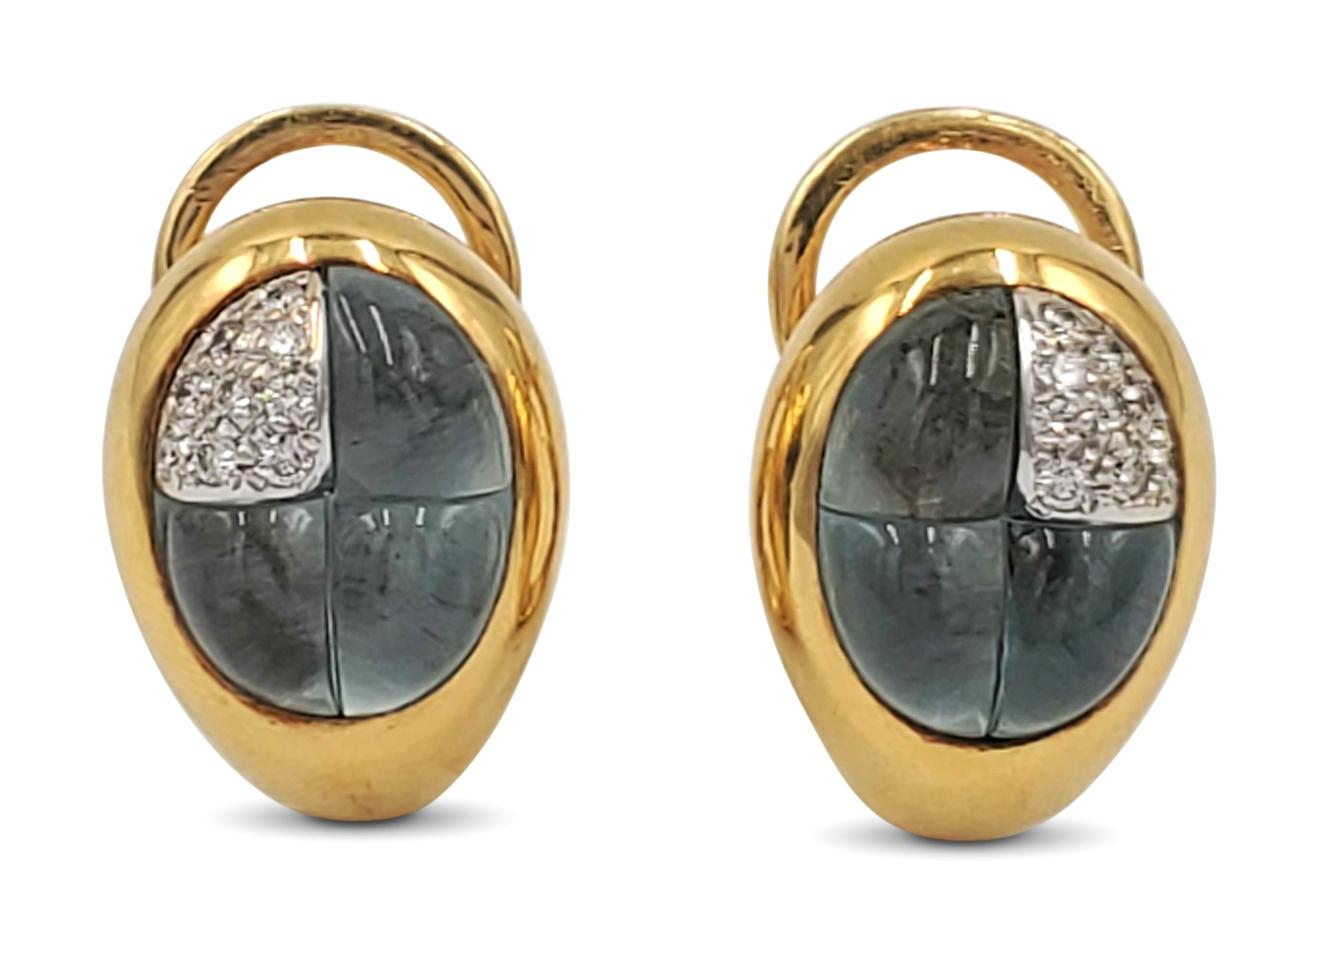 Authentic Pomellato earrings crafted in 18 karat yellow gold centering on three sections of carved cabochon blue topaz stones and one section of an estimated 0.18 round brilliant cut diamonds (F-G color, VS clarity). 